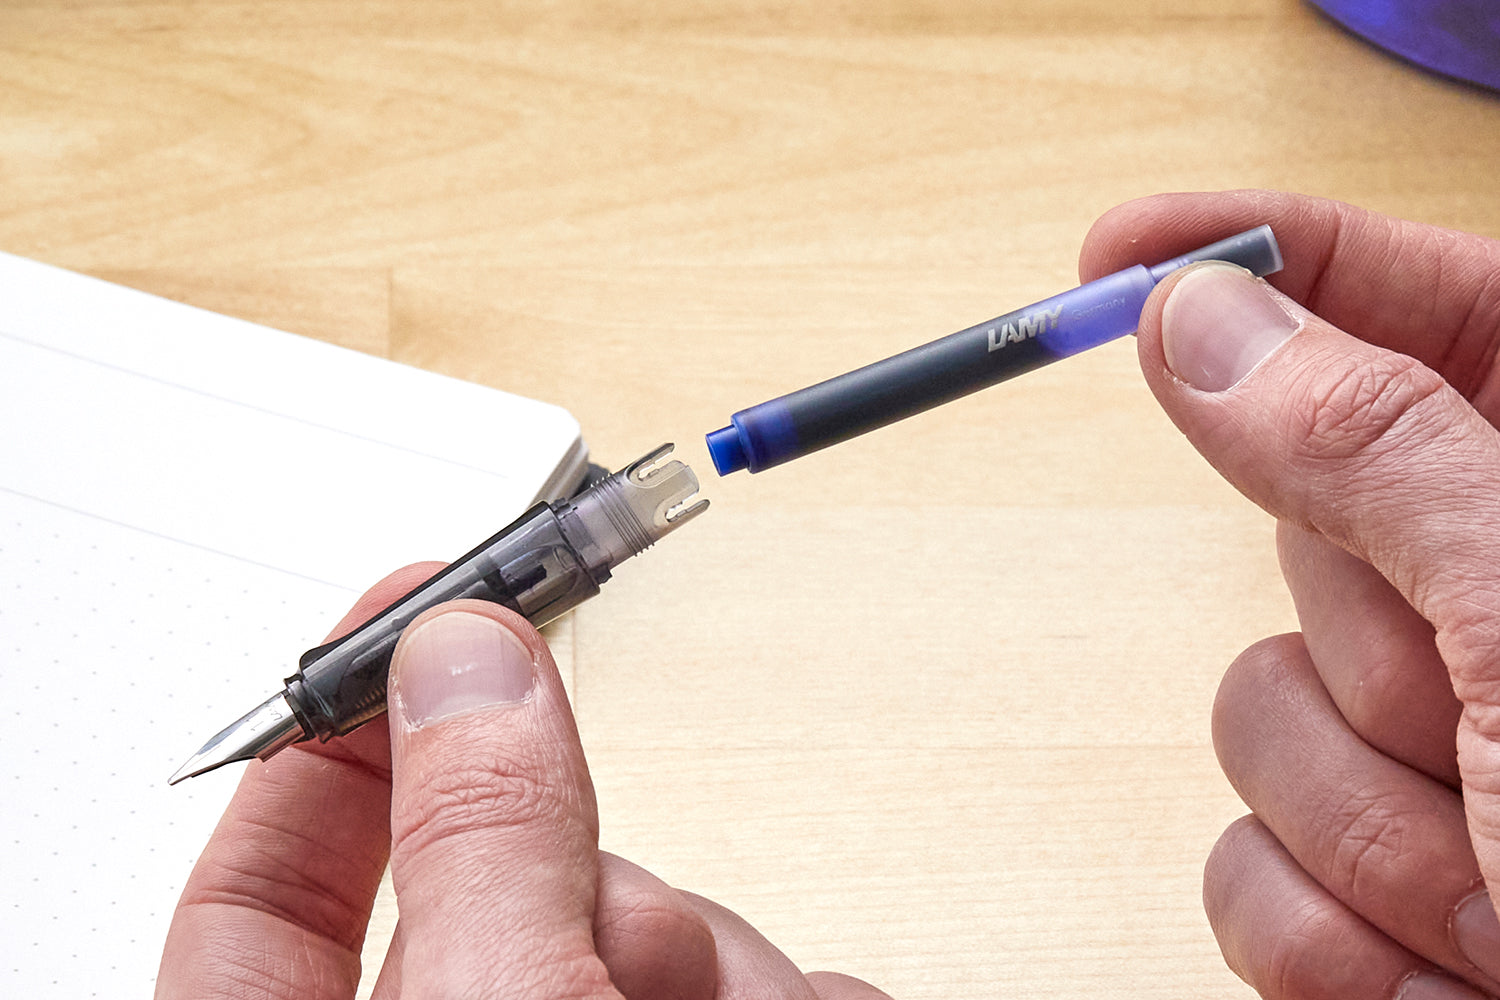 Holding a blue LAMY ink cartridge, about to install into a pen